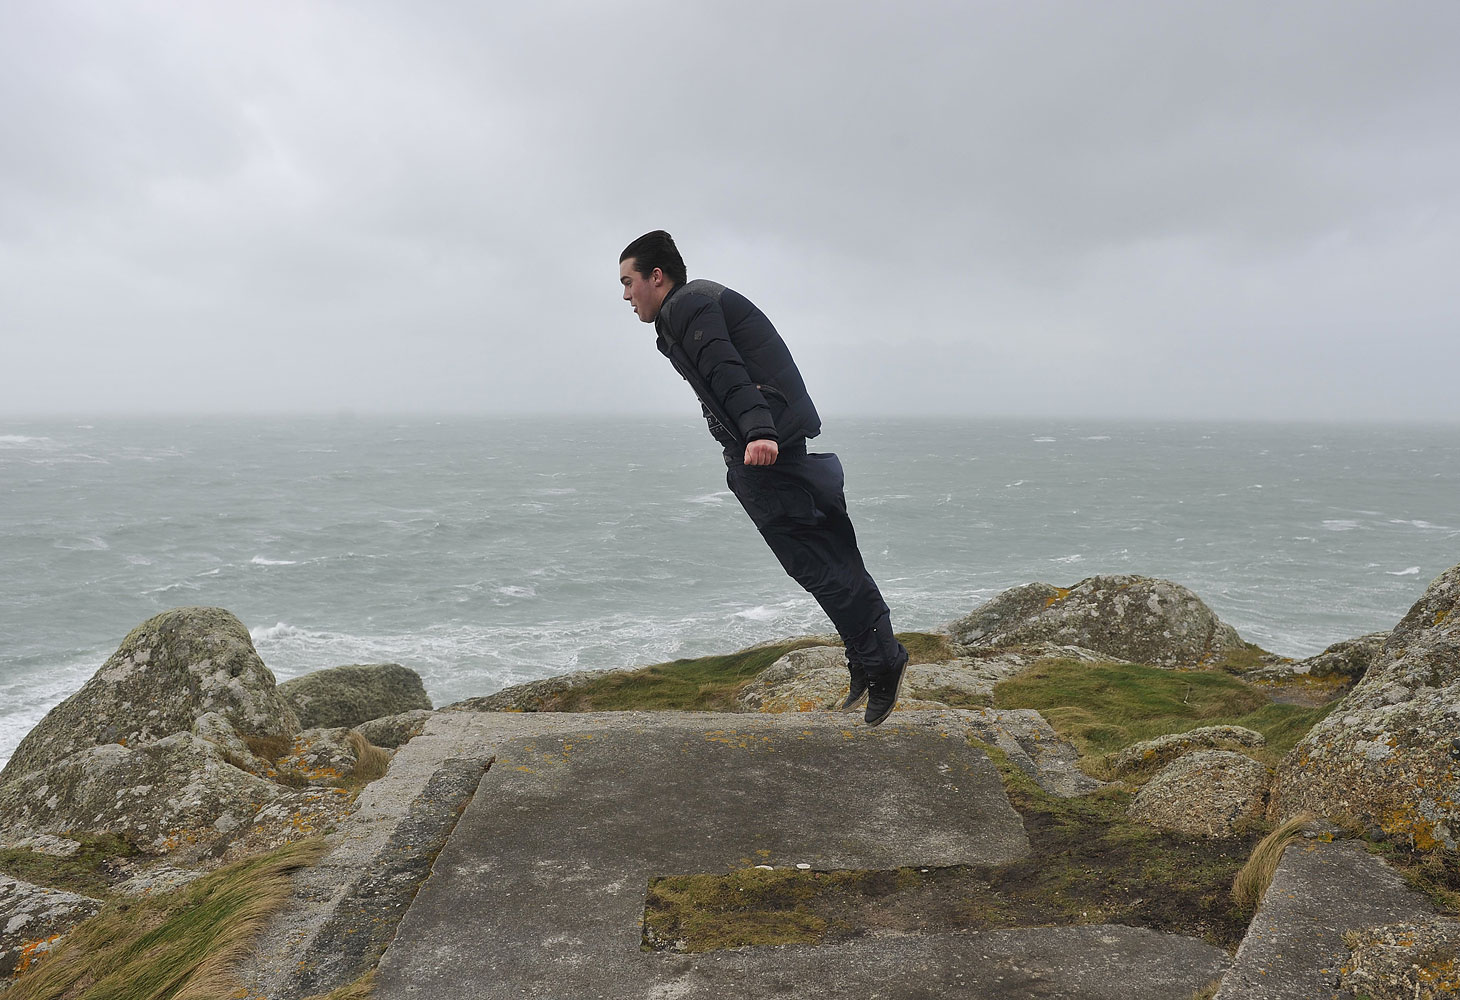 A man floats in the air as he uses his jacket to catch gale force winds as a storm hits the seafront at Sennen Cove at the Western tip of Cornwall, UK, Feb. 8, 2014. (Mark Hemsworth—London News Pictures/Zumapress)